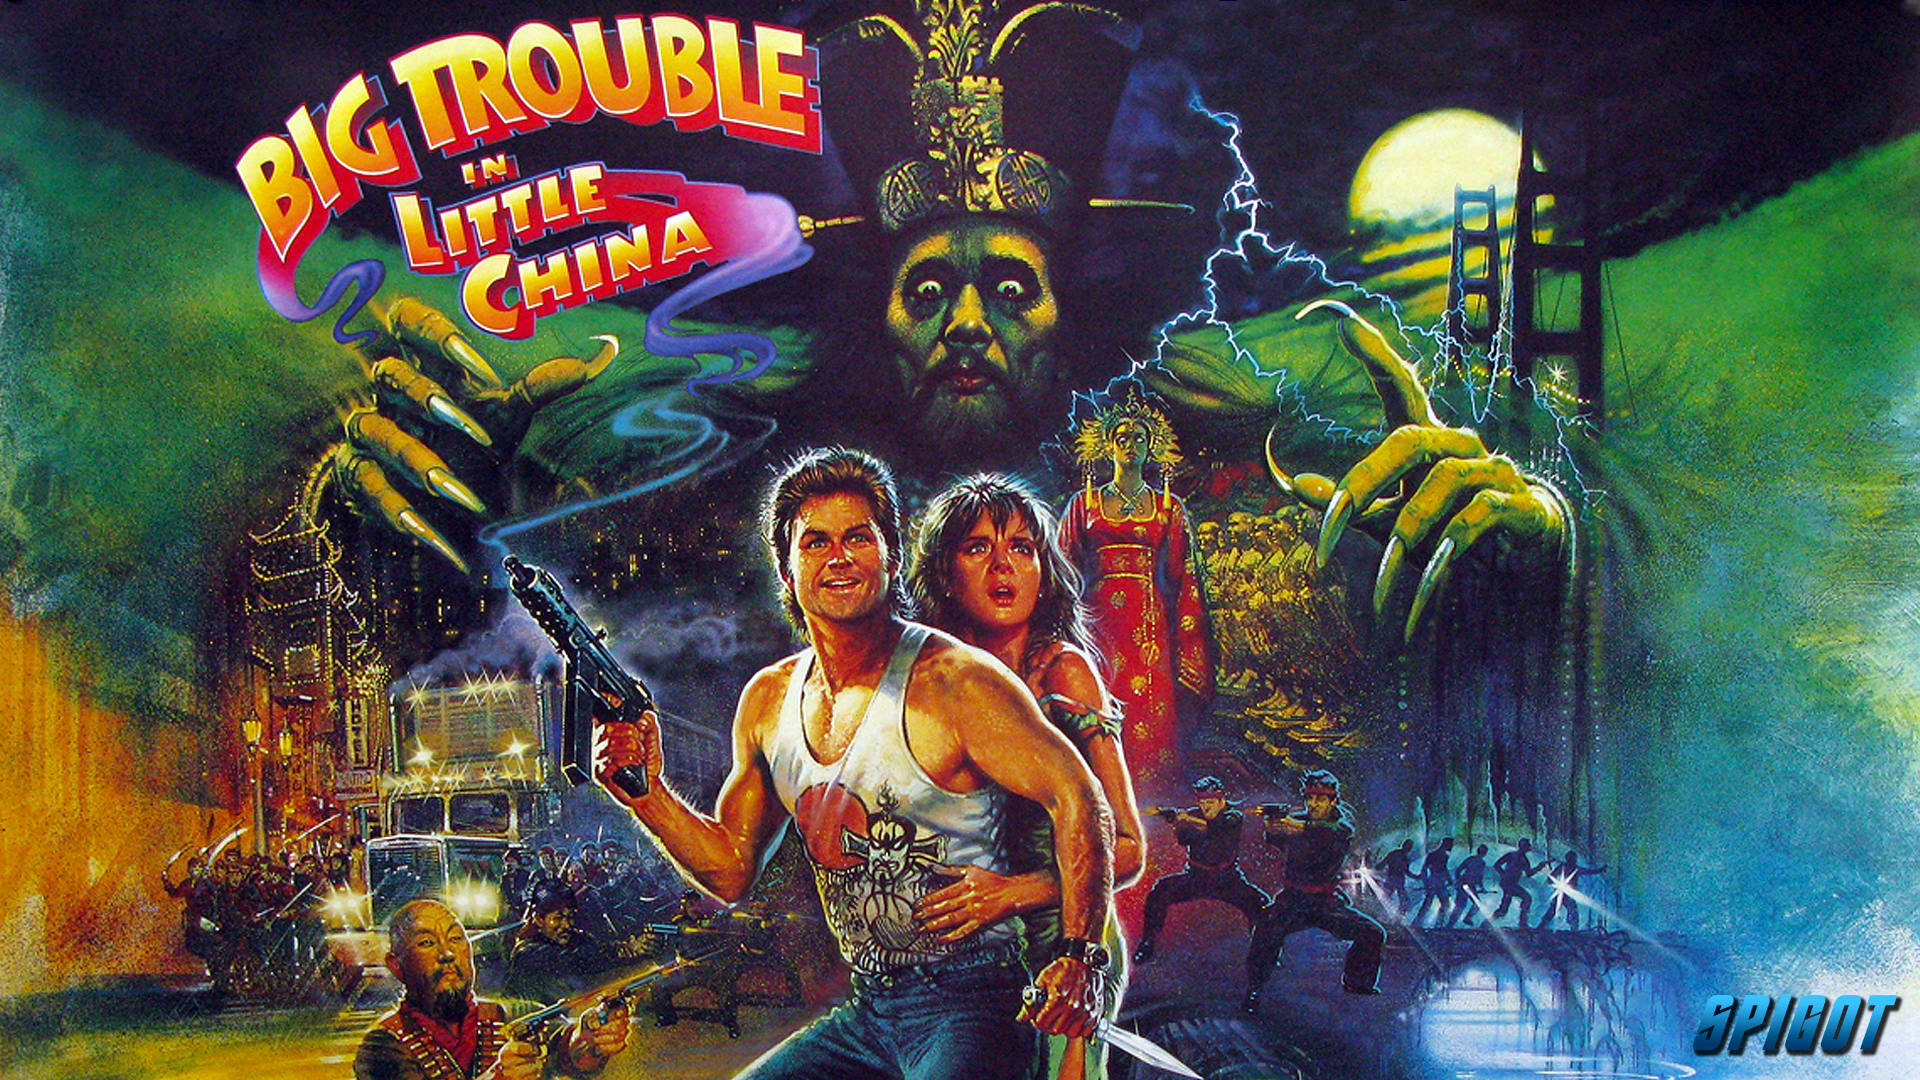 Big Trouble In Little China Jack Burton Gracie Law Movie Poster 1920x1080